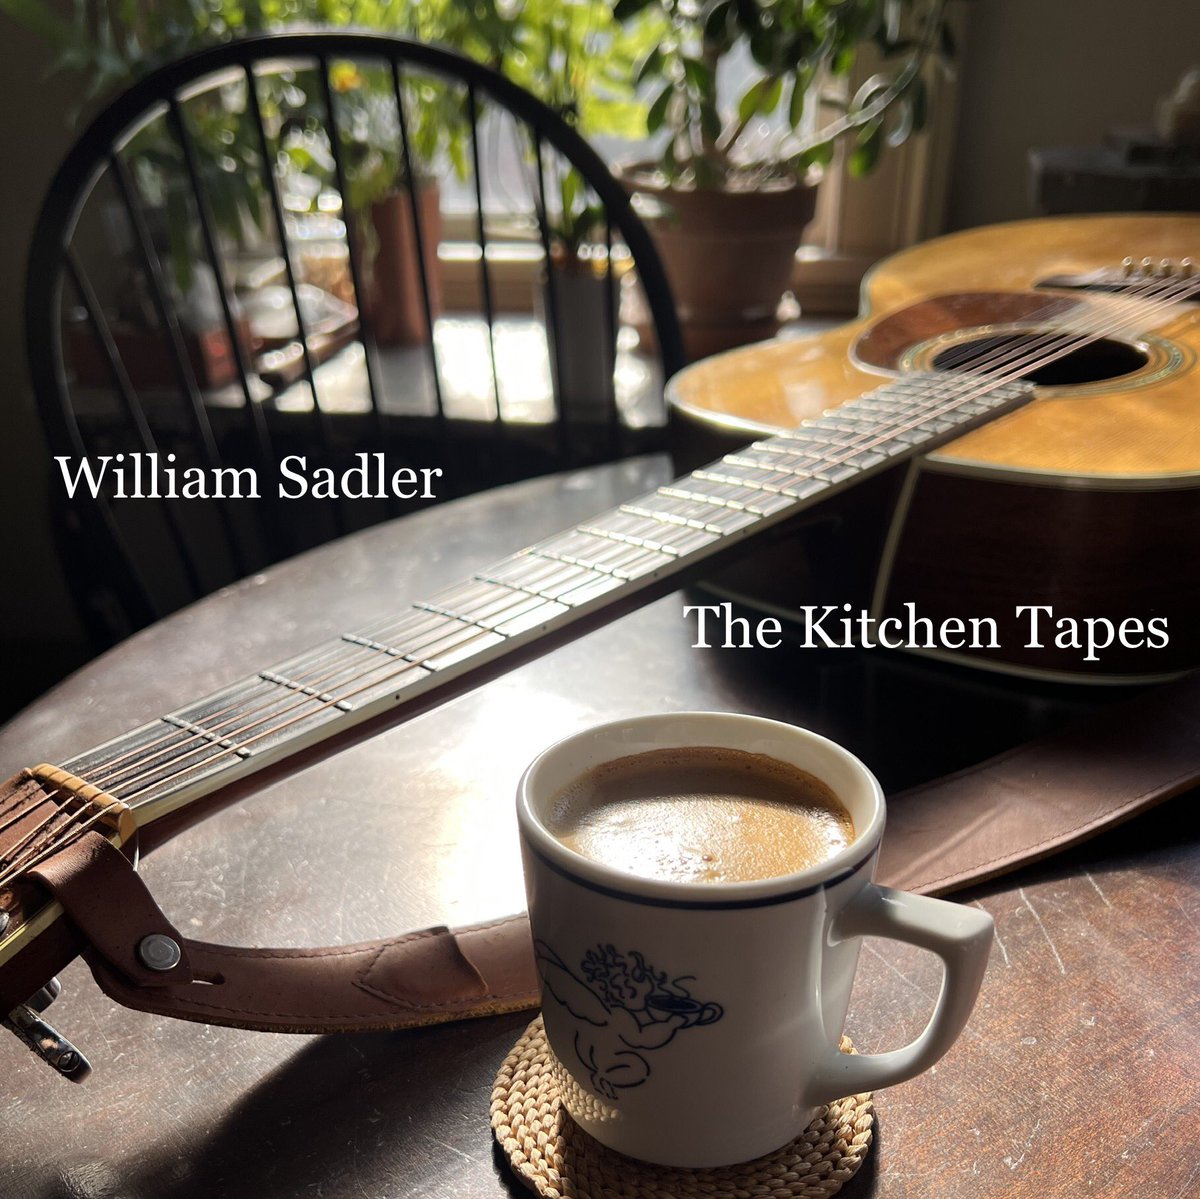 IT’S OUT! WILLIAMSADLER.BANDCAMP.COM AND REVIEWS ARE IN! “BEST ALBUM IN THE HISTORY OF ALBUMS!” George Santos “SADLER’S KITCHEN TAPES MAKES YOU WONDER WHAT HE WOULD SOUND LIKE IN OTHER ROOMS” “LIKE MOM’S FAMOUS 3 BEAN SALAD. GREAT 1st BITE THEN YOU HEAR IT AGAIN AND AGAIN”